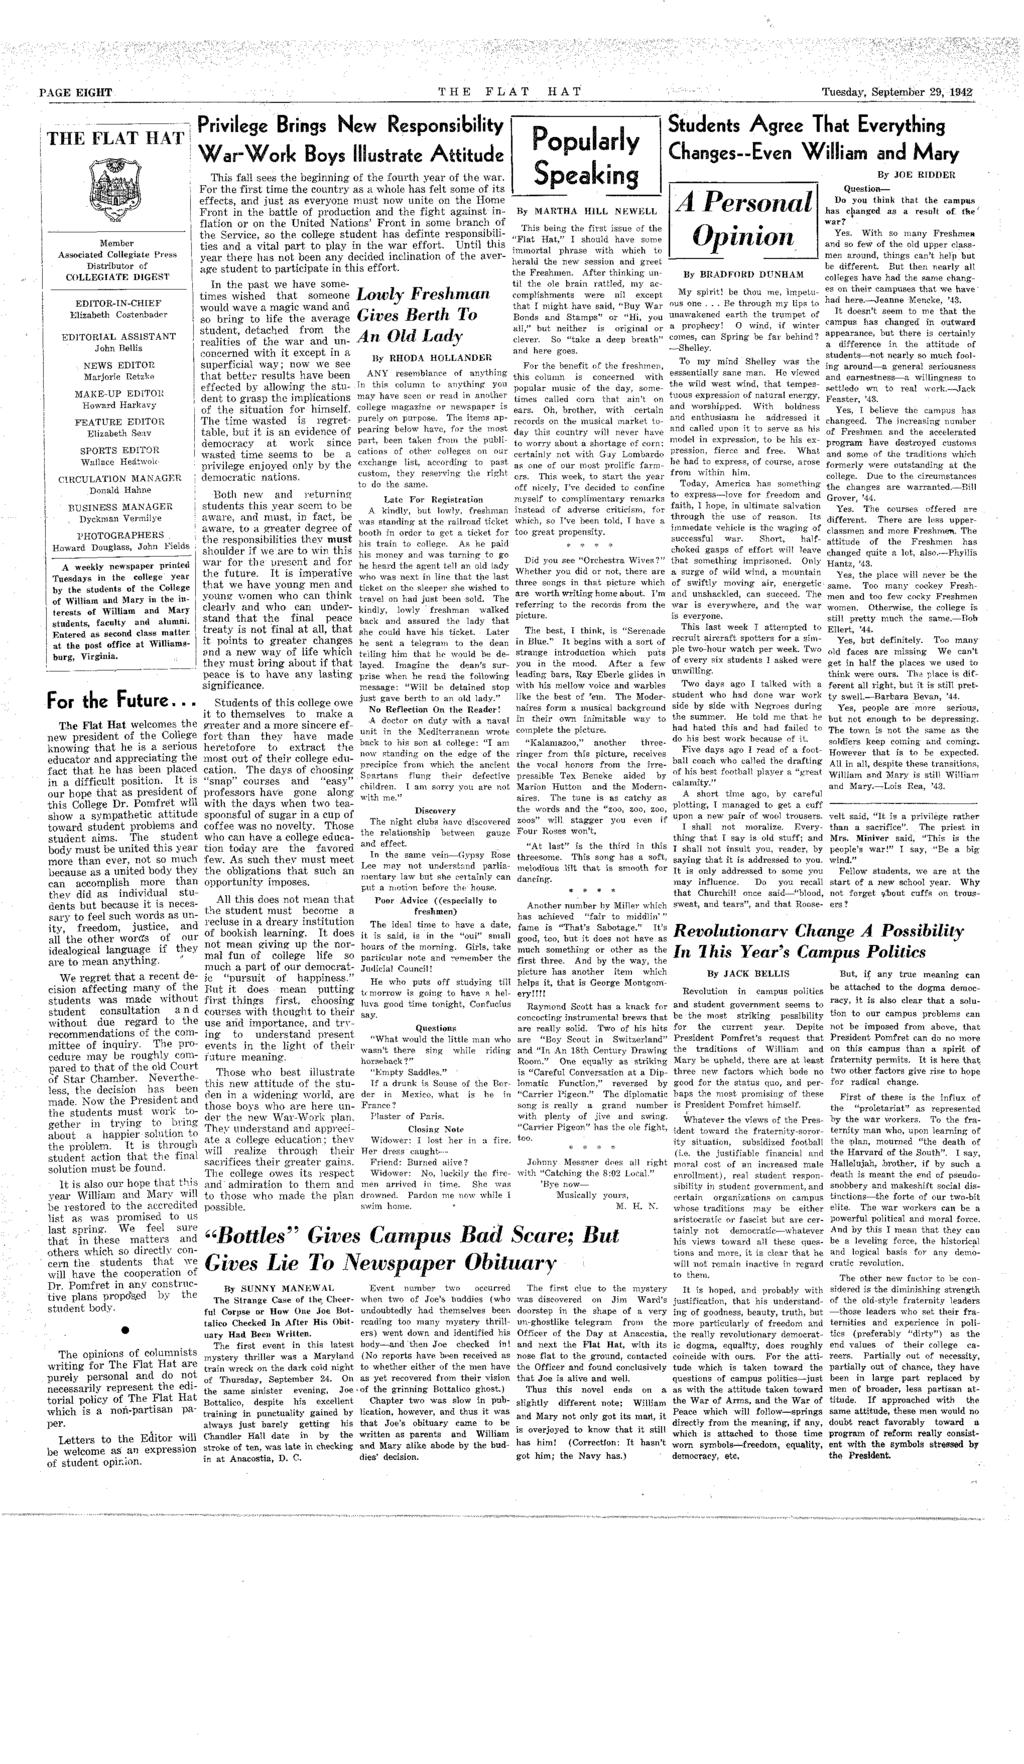 PAGE EIGHT THE FLAT HAT Tuesday, Sepember 29, 192' THE FLAT HAT Member Assocaed Collegae Press Dsrbuor of COLLEGIATE DIGEST EDITOR-IN-CHIEF Elzabeh Cosenbader EDITORIAL ASSISTANT John Bells NEWS